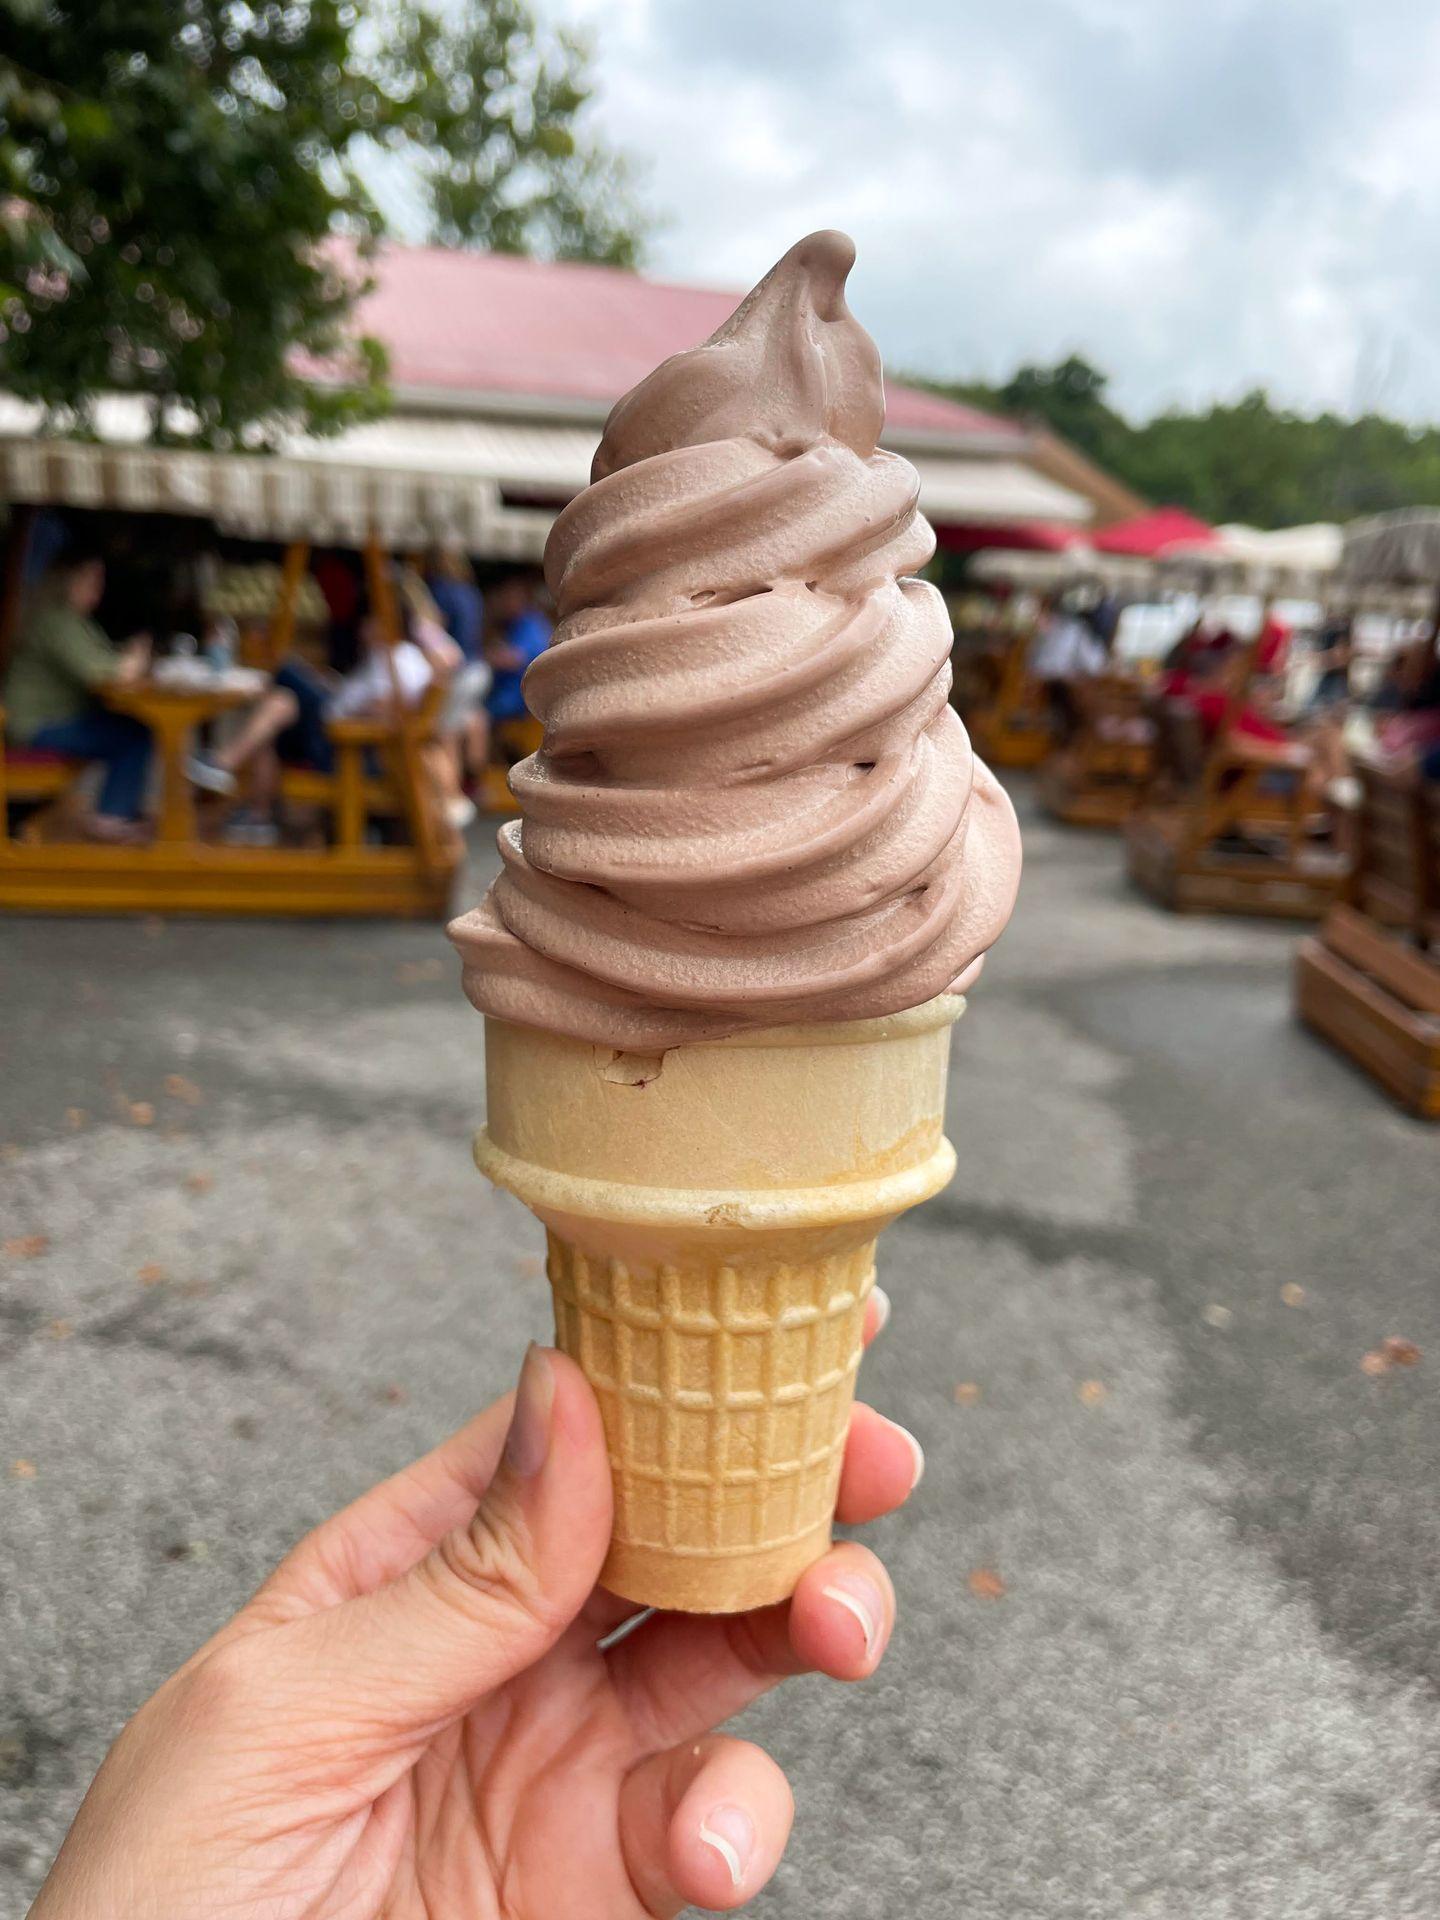 An ice cream cone with chocolate soft serve from Szalay's Farm & Market.